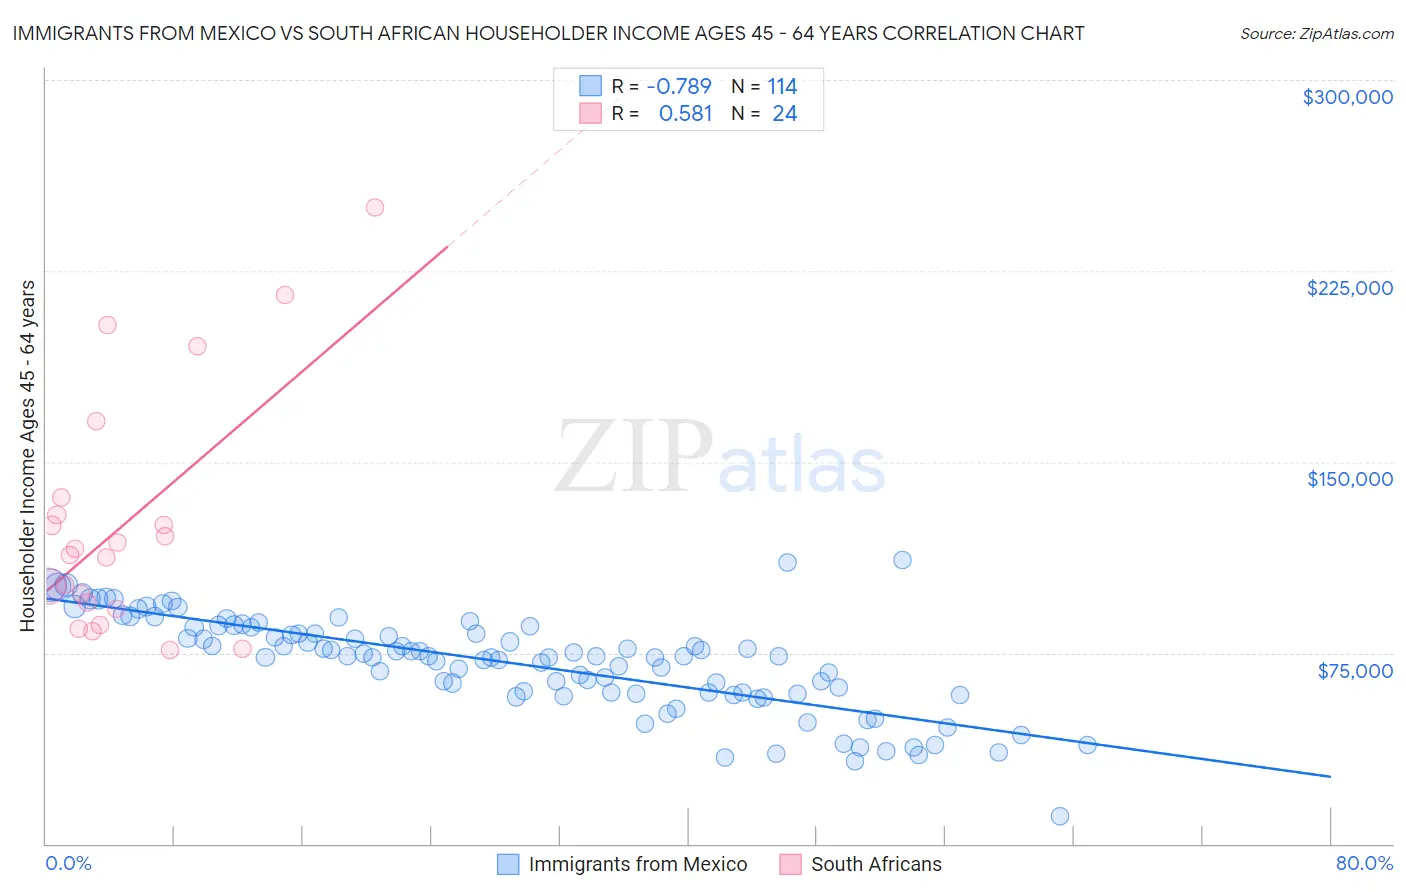 Immigrants from Mexico vs South African Householder Income Ages 45 - 64 years